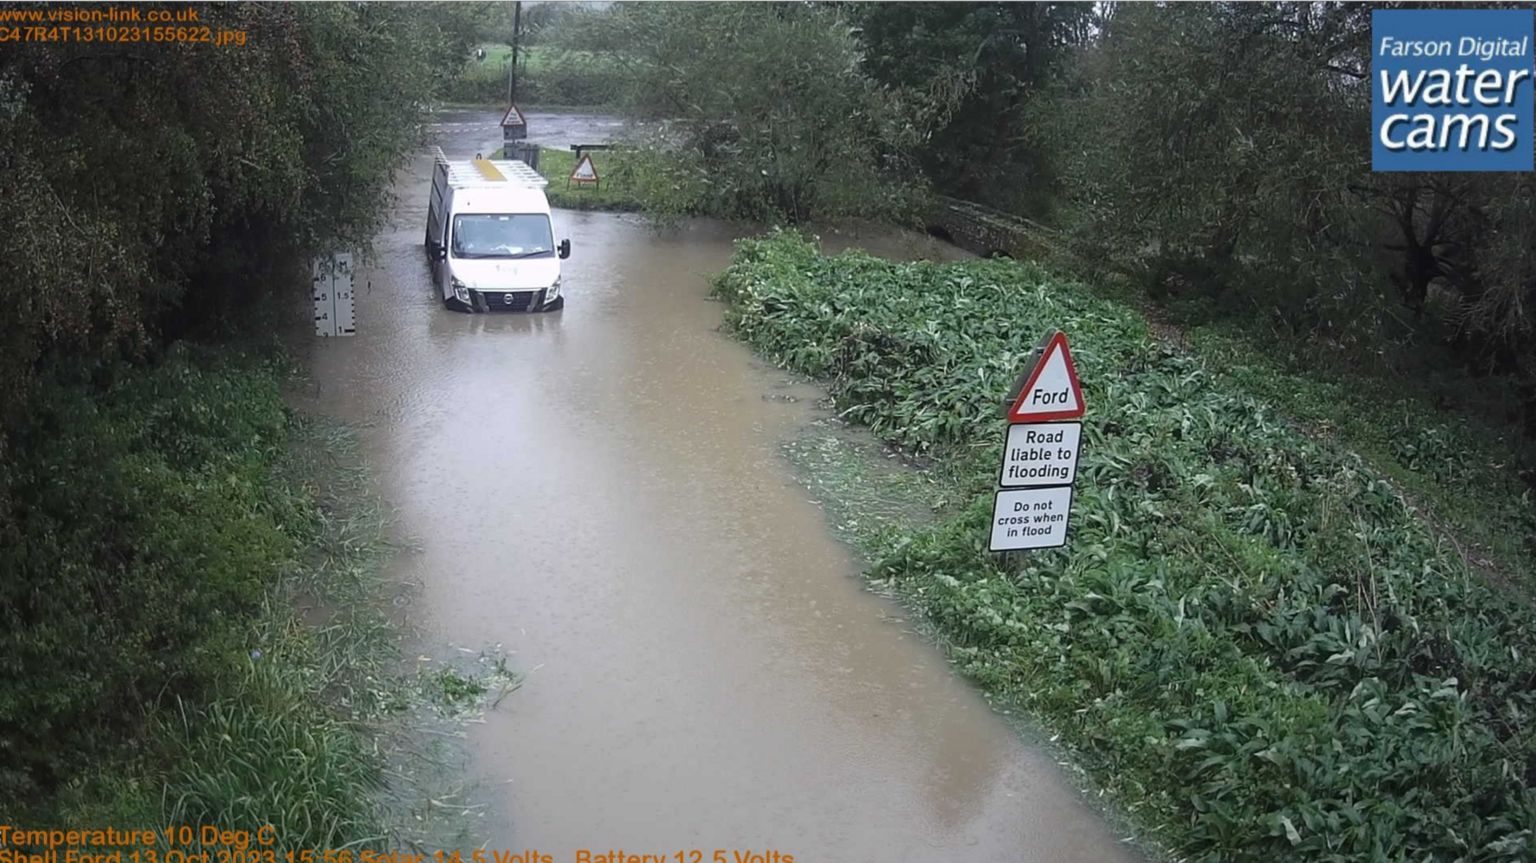 A white van surrounded and stuck in water